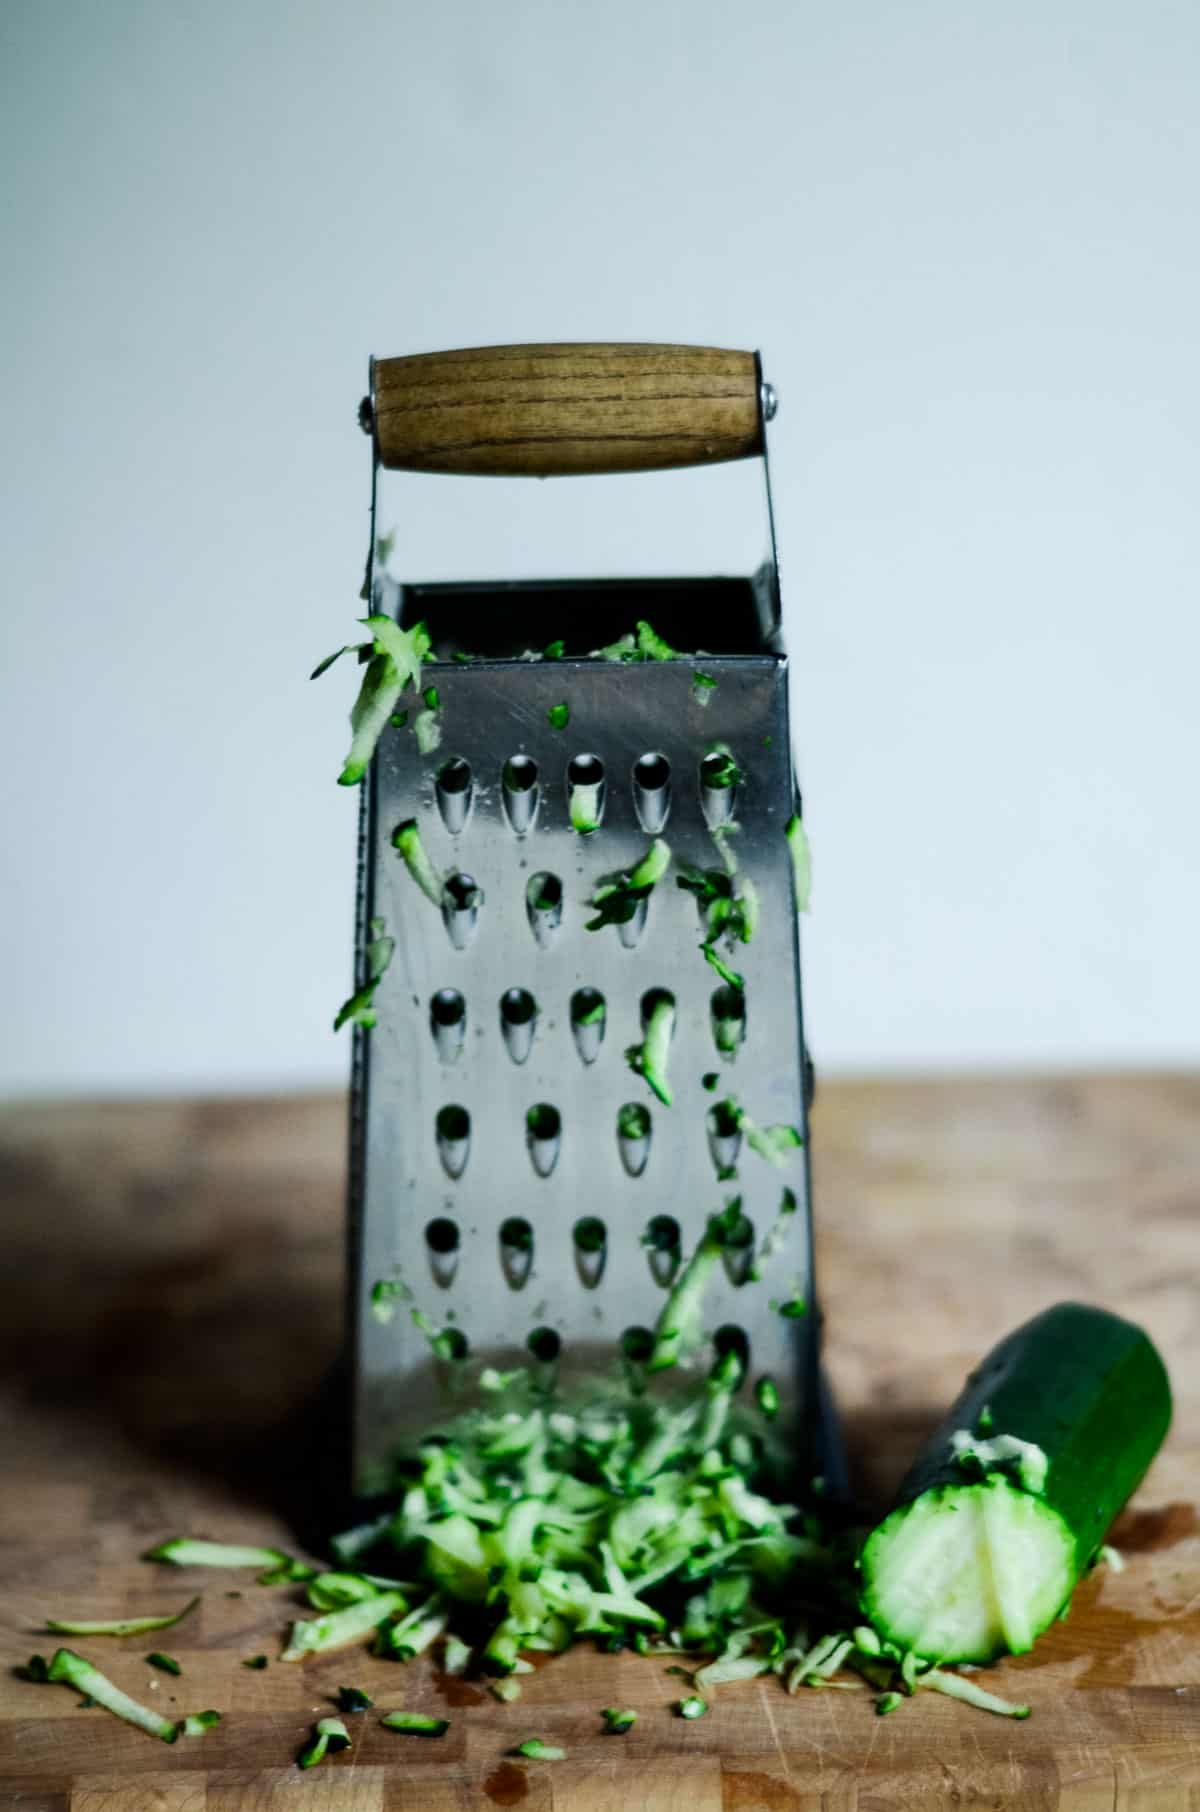 Grating zucchini on a box grater with a wooden handle, half a green and white zucchini sitting on cutting board. 